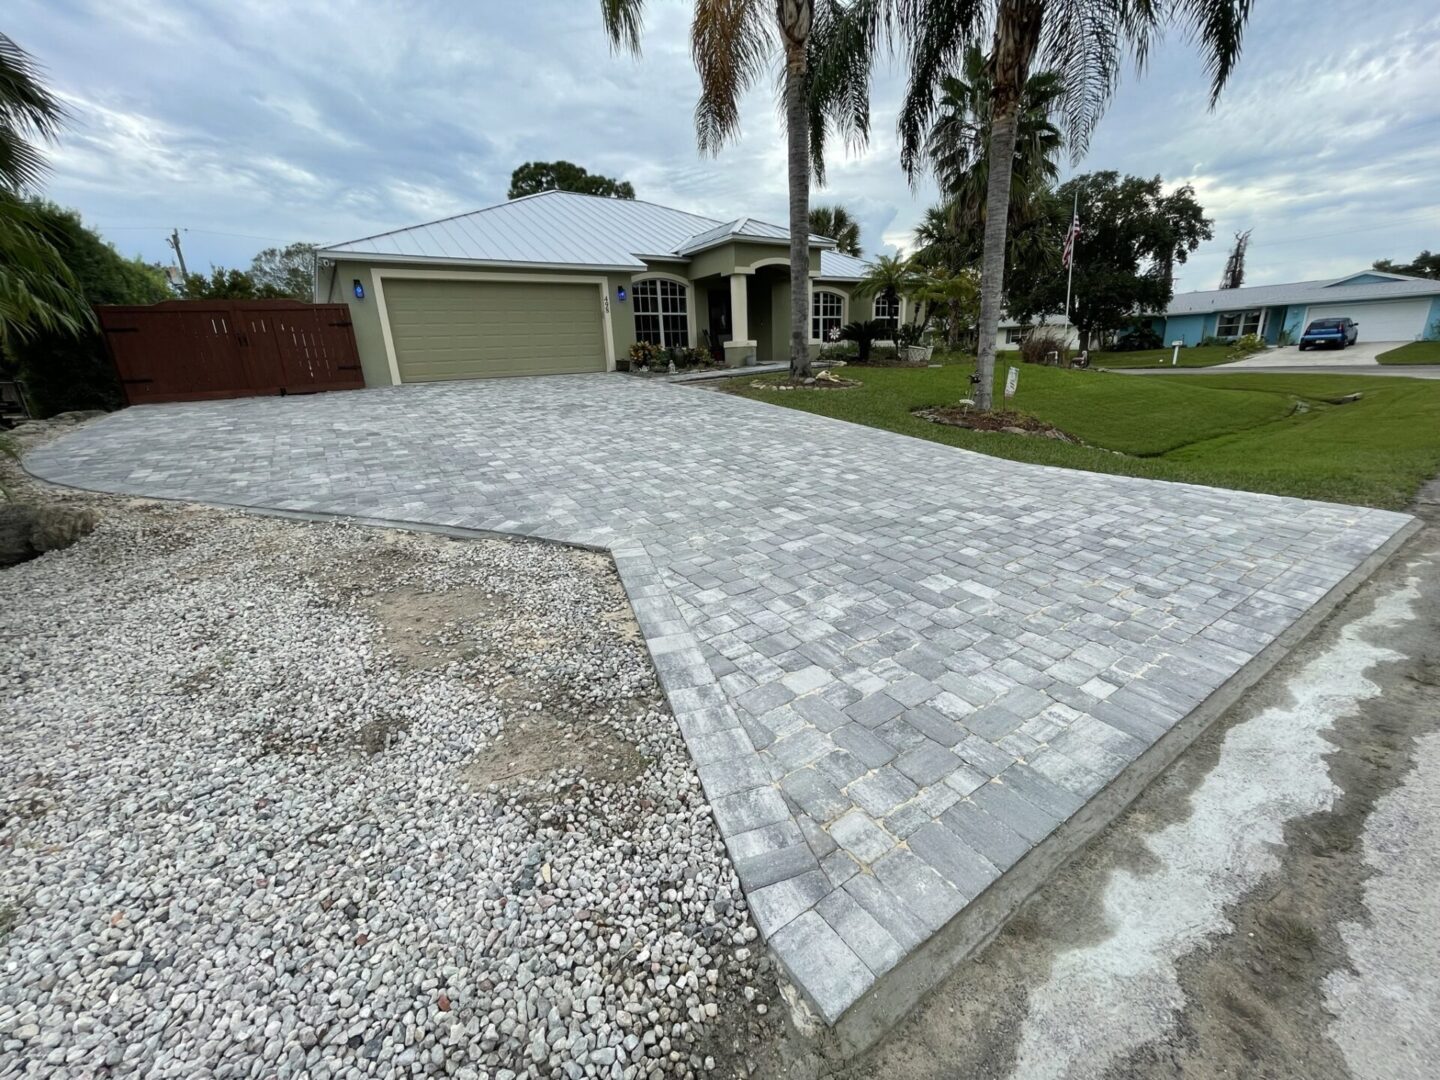 A house with a double garage and a light grey stone paver driveway. There are palm trees and a lawn on the right side. The driveway curves to the left with gravel along the edge.